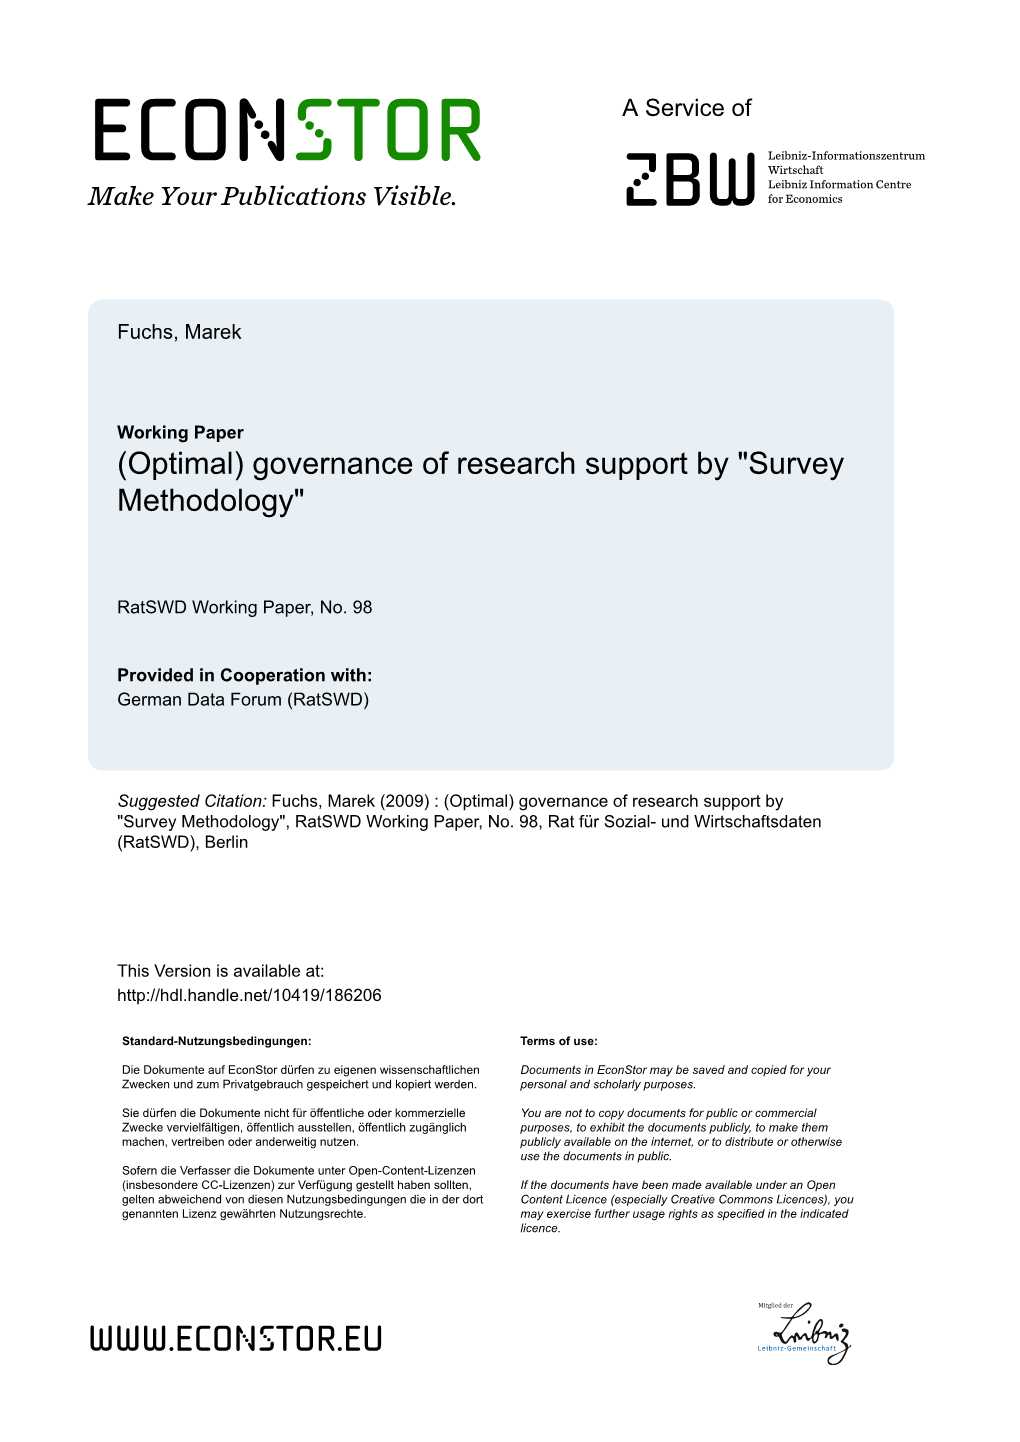 (Optimal) Governance of Research Support by "Survey Methodology"